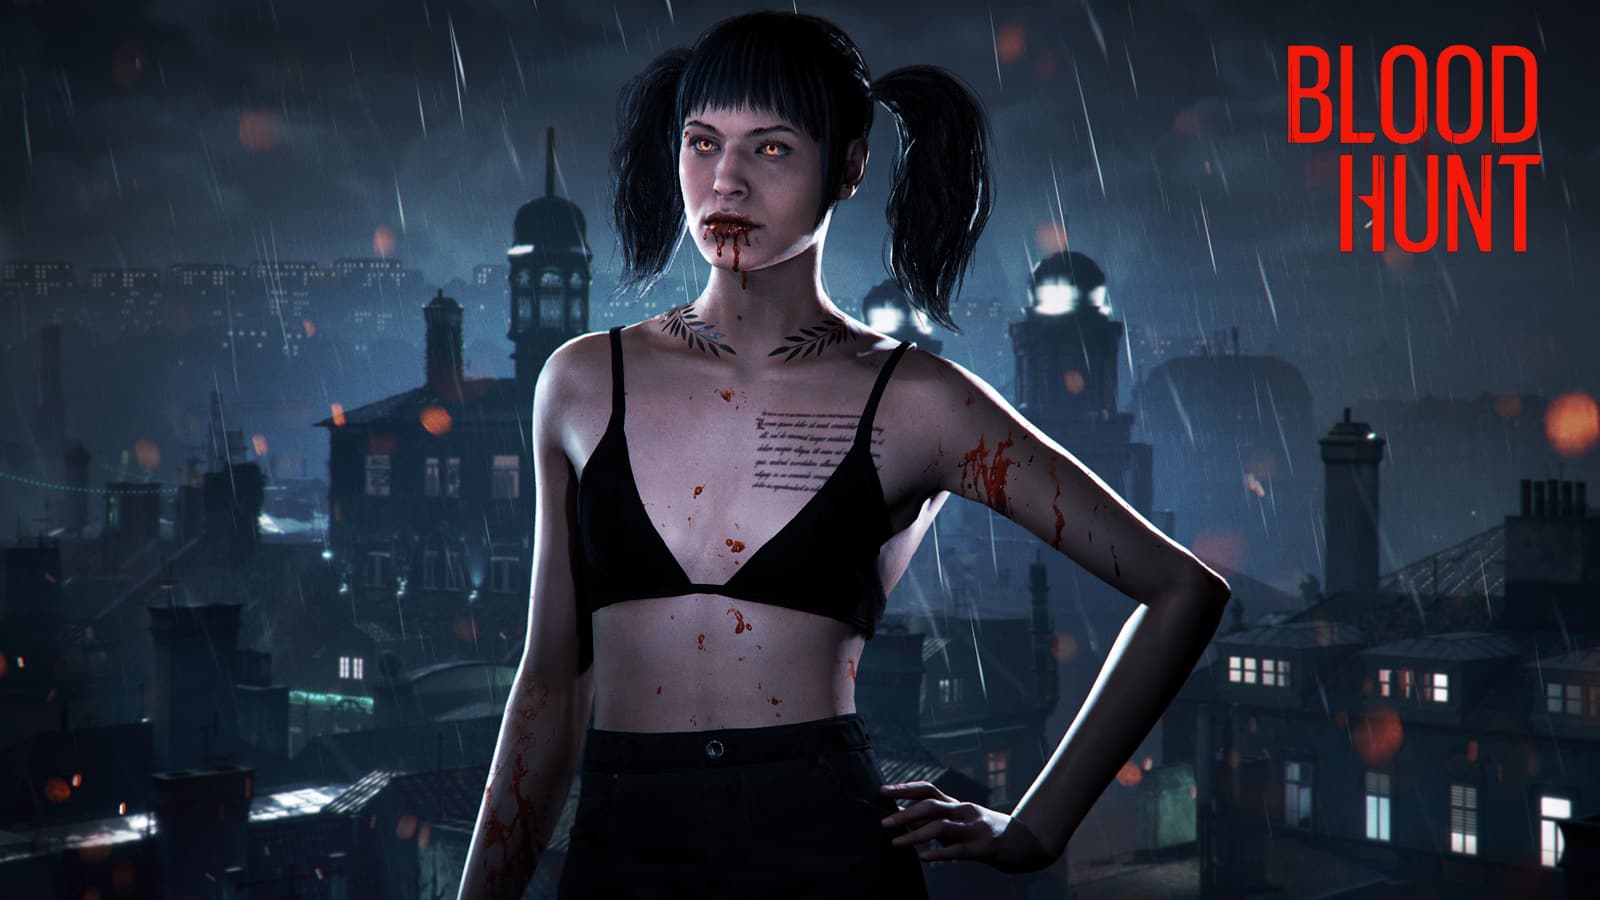 The Community Patch for Vampire: The Masquerade - Bloodhunt adds